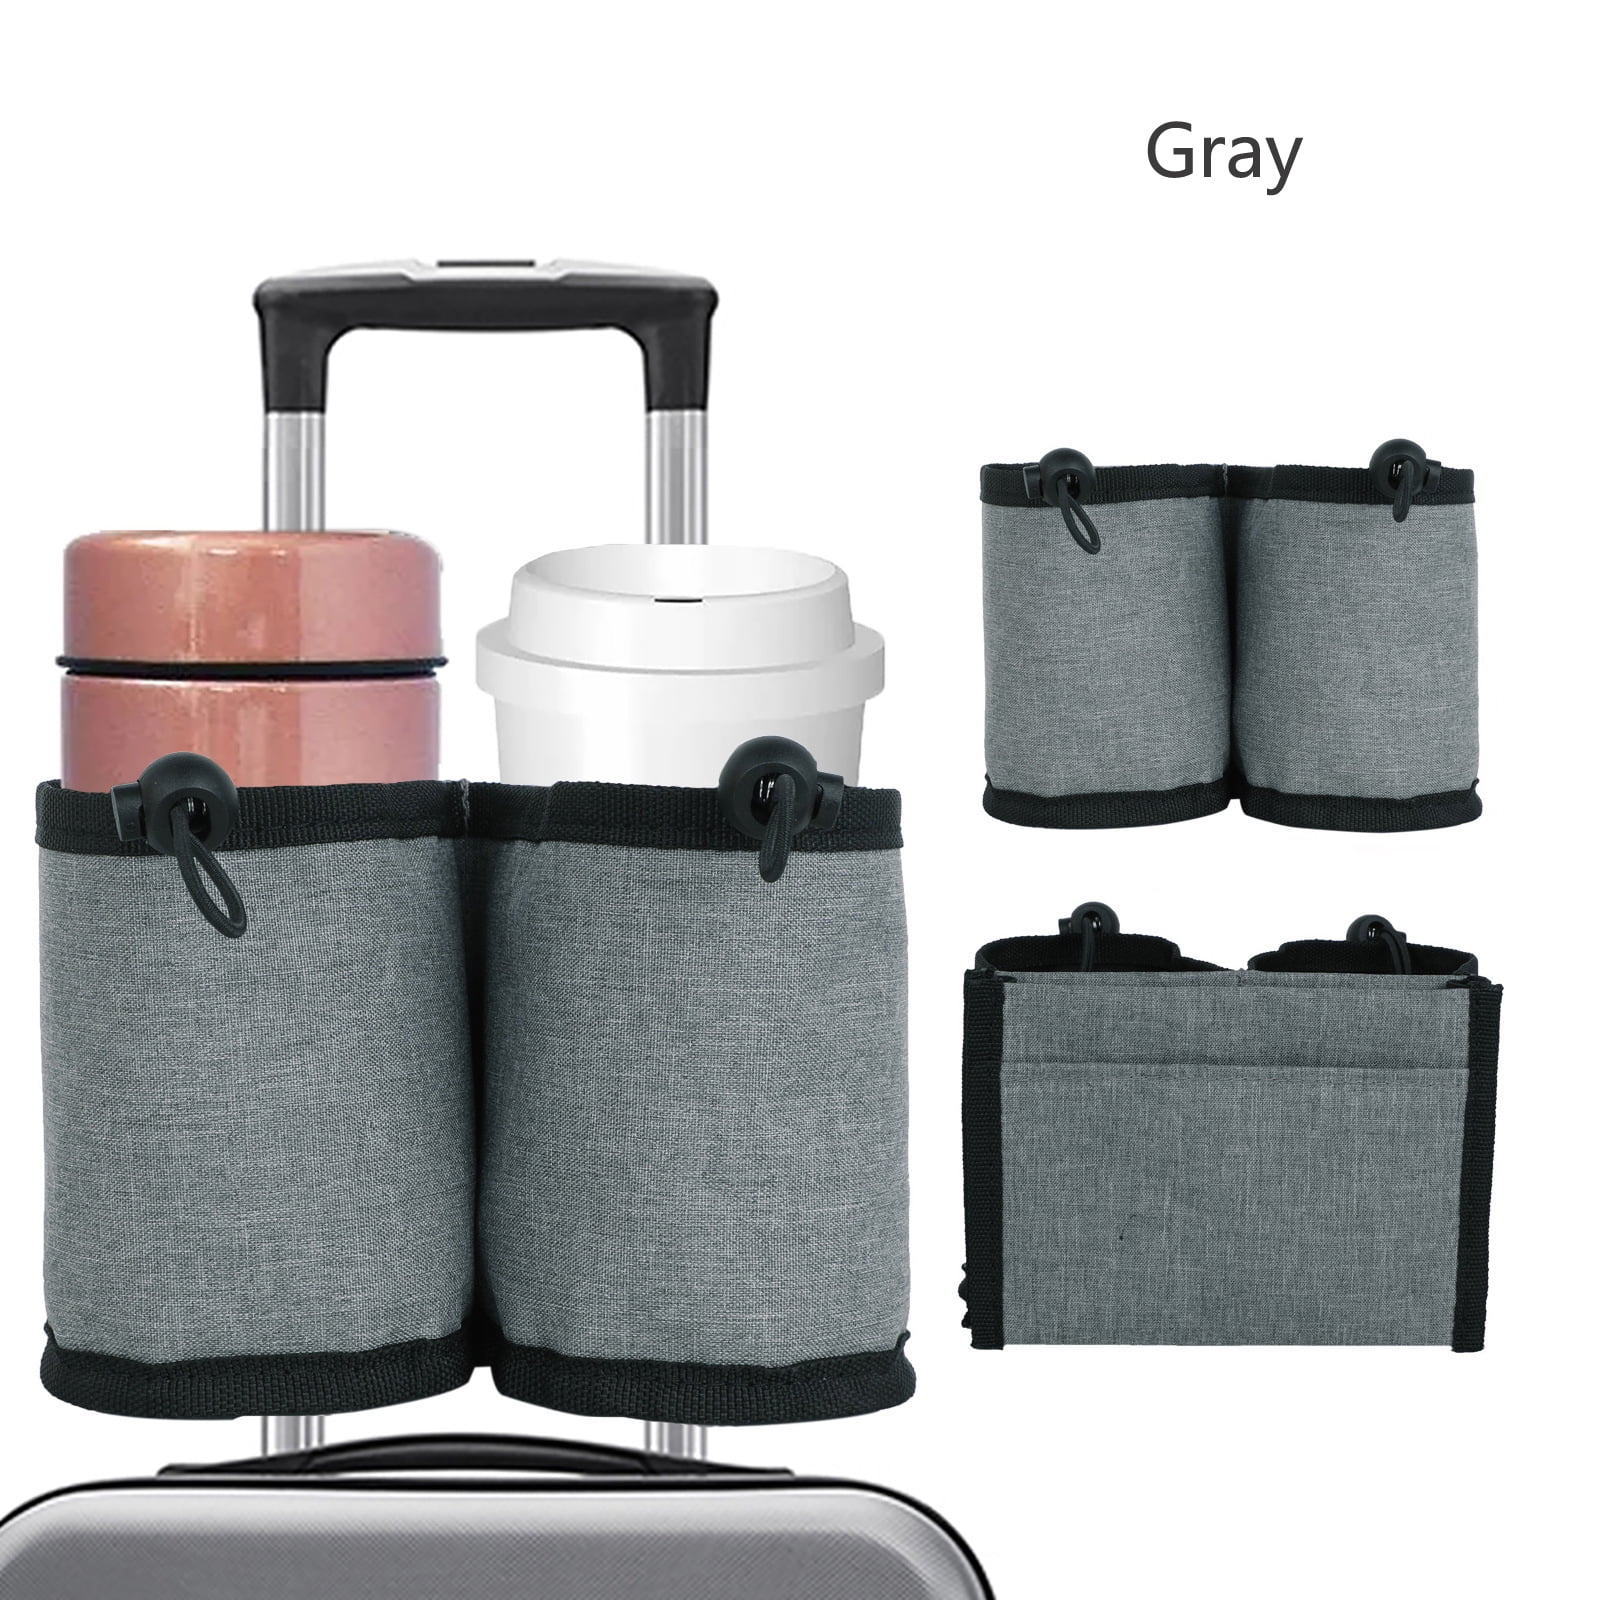 Luggage Travel Cup Holder X-Protector - Black Suitcase Cup Holder